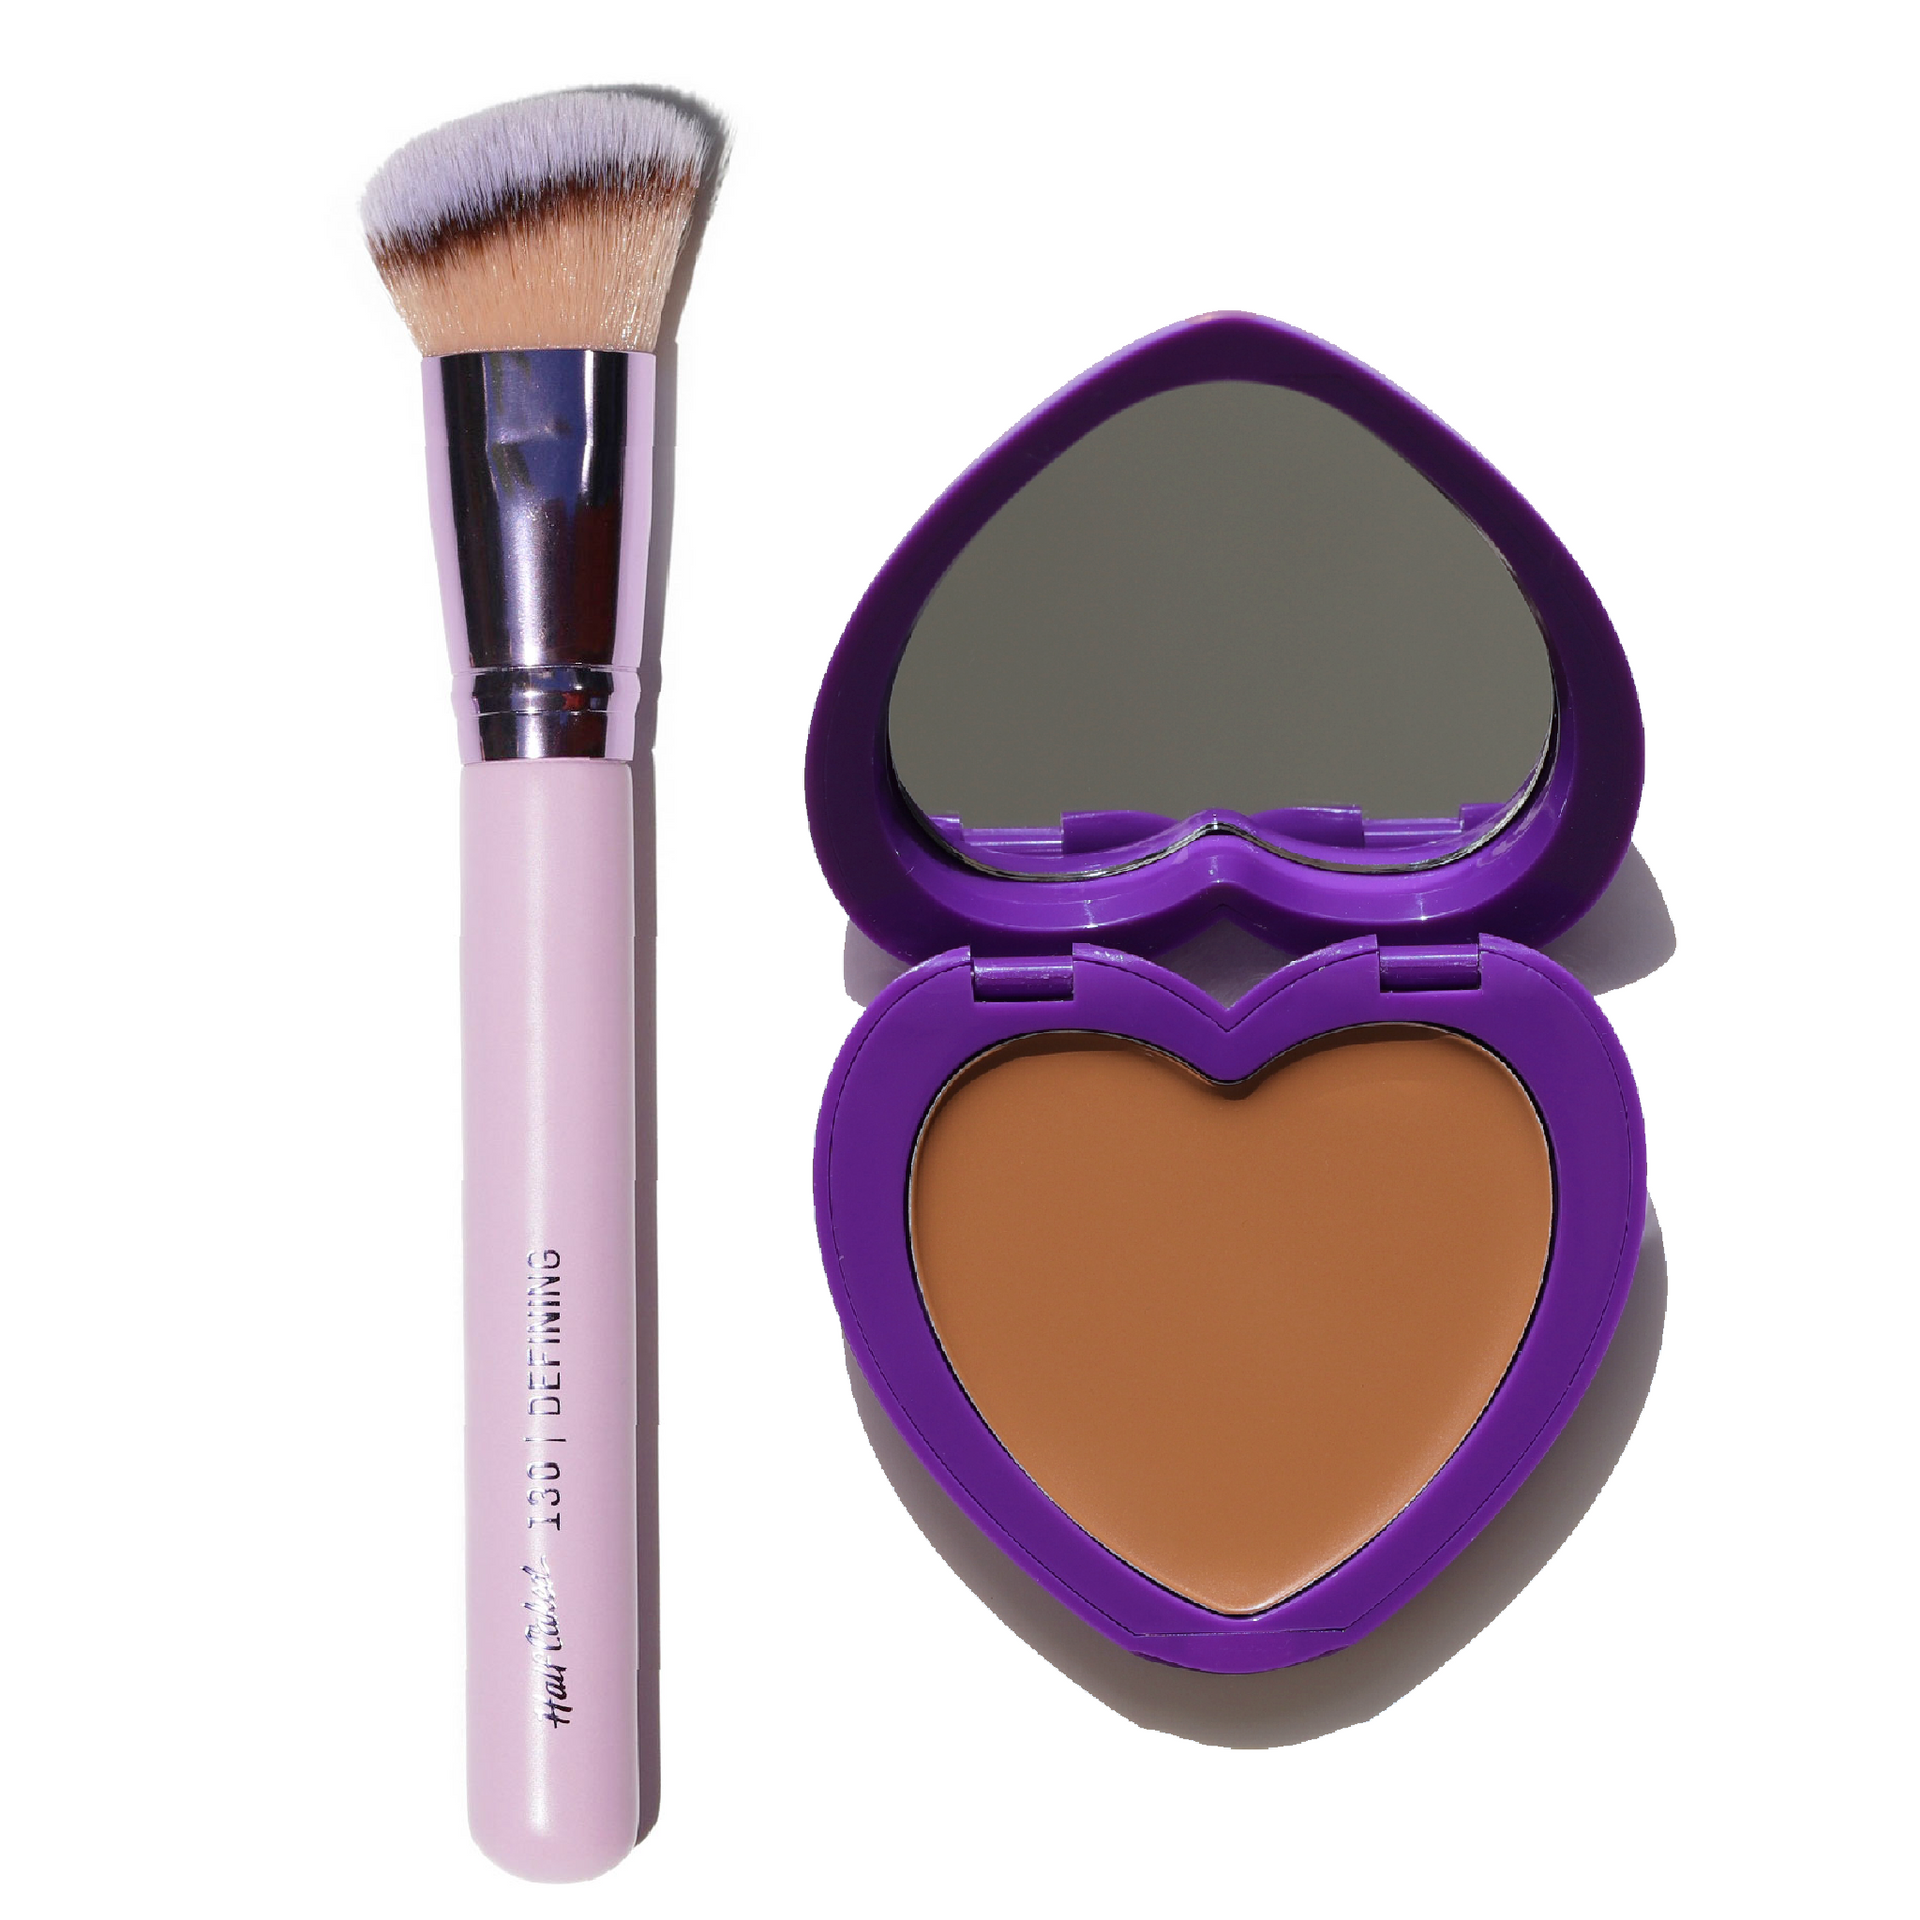 open purple heart shaped compact with brown pan and mirror - Instant Cheekbones Set - Half Caked